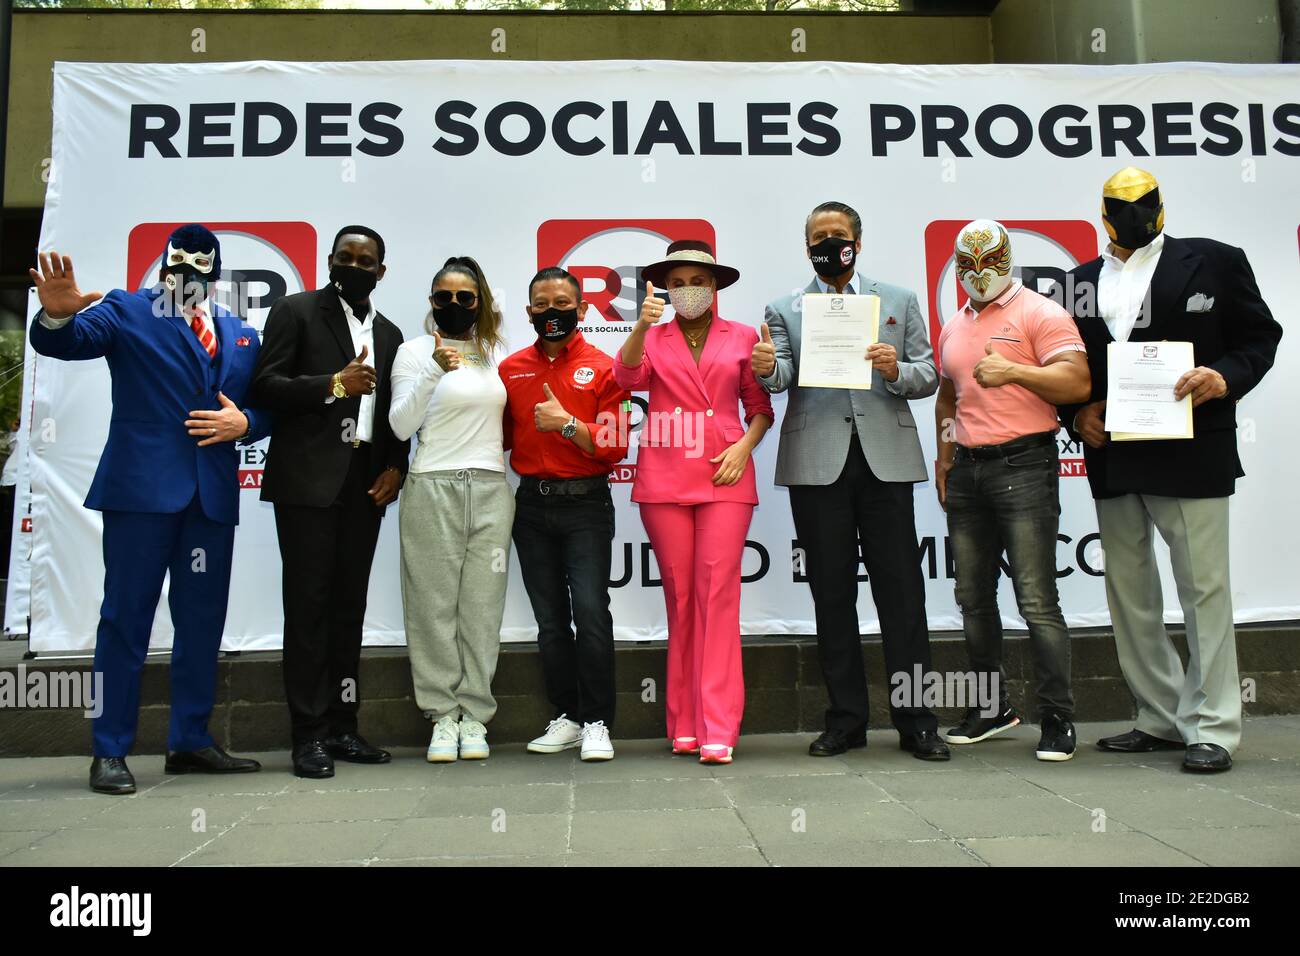 Mexico City, Mexico. 13th Jan, 2021. MEXICO CITY, MEXICO JANUARY 13: (L-R) Blue Demon Jr, Mariana Juarez, Hector Hernandez, Malillany Marin, Alfredo Adame, Mistico, Tinieblas, integrants of Progressive Social Networks Political party (RSP) pose for photos during the pre-registration as a new political party. On January 13, 2021 in Mexico City, Mexico (Photo by Eyepix Group/Pacific Press) Credit: Pacific Press Media Production Corp./Alamy Live News Stock Photo